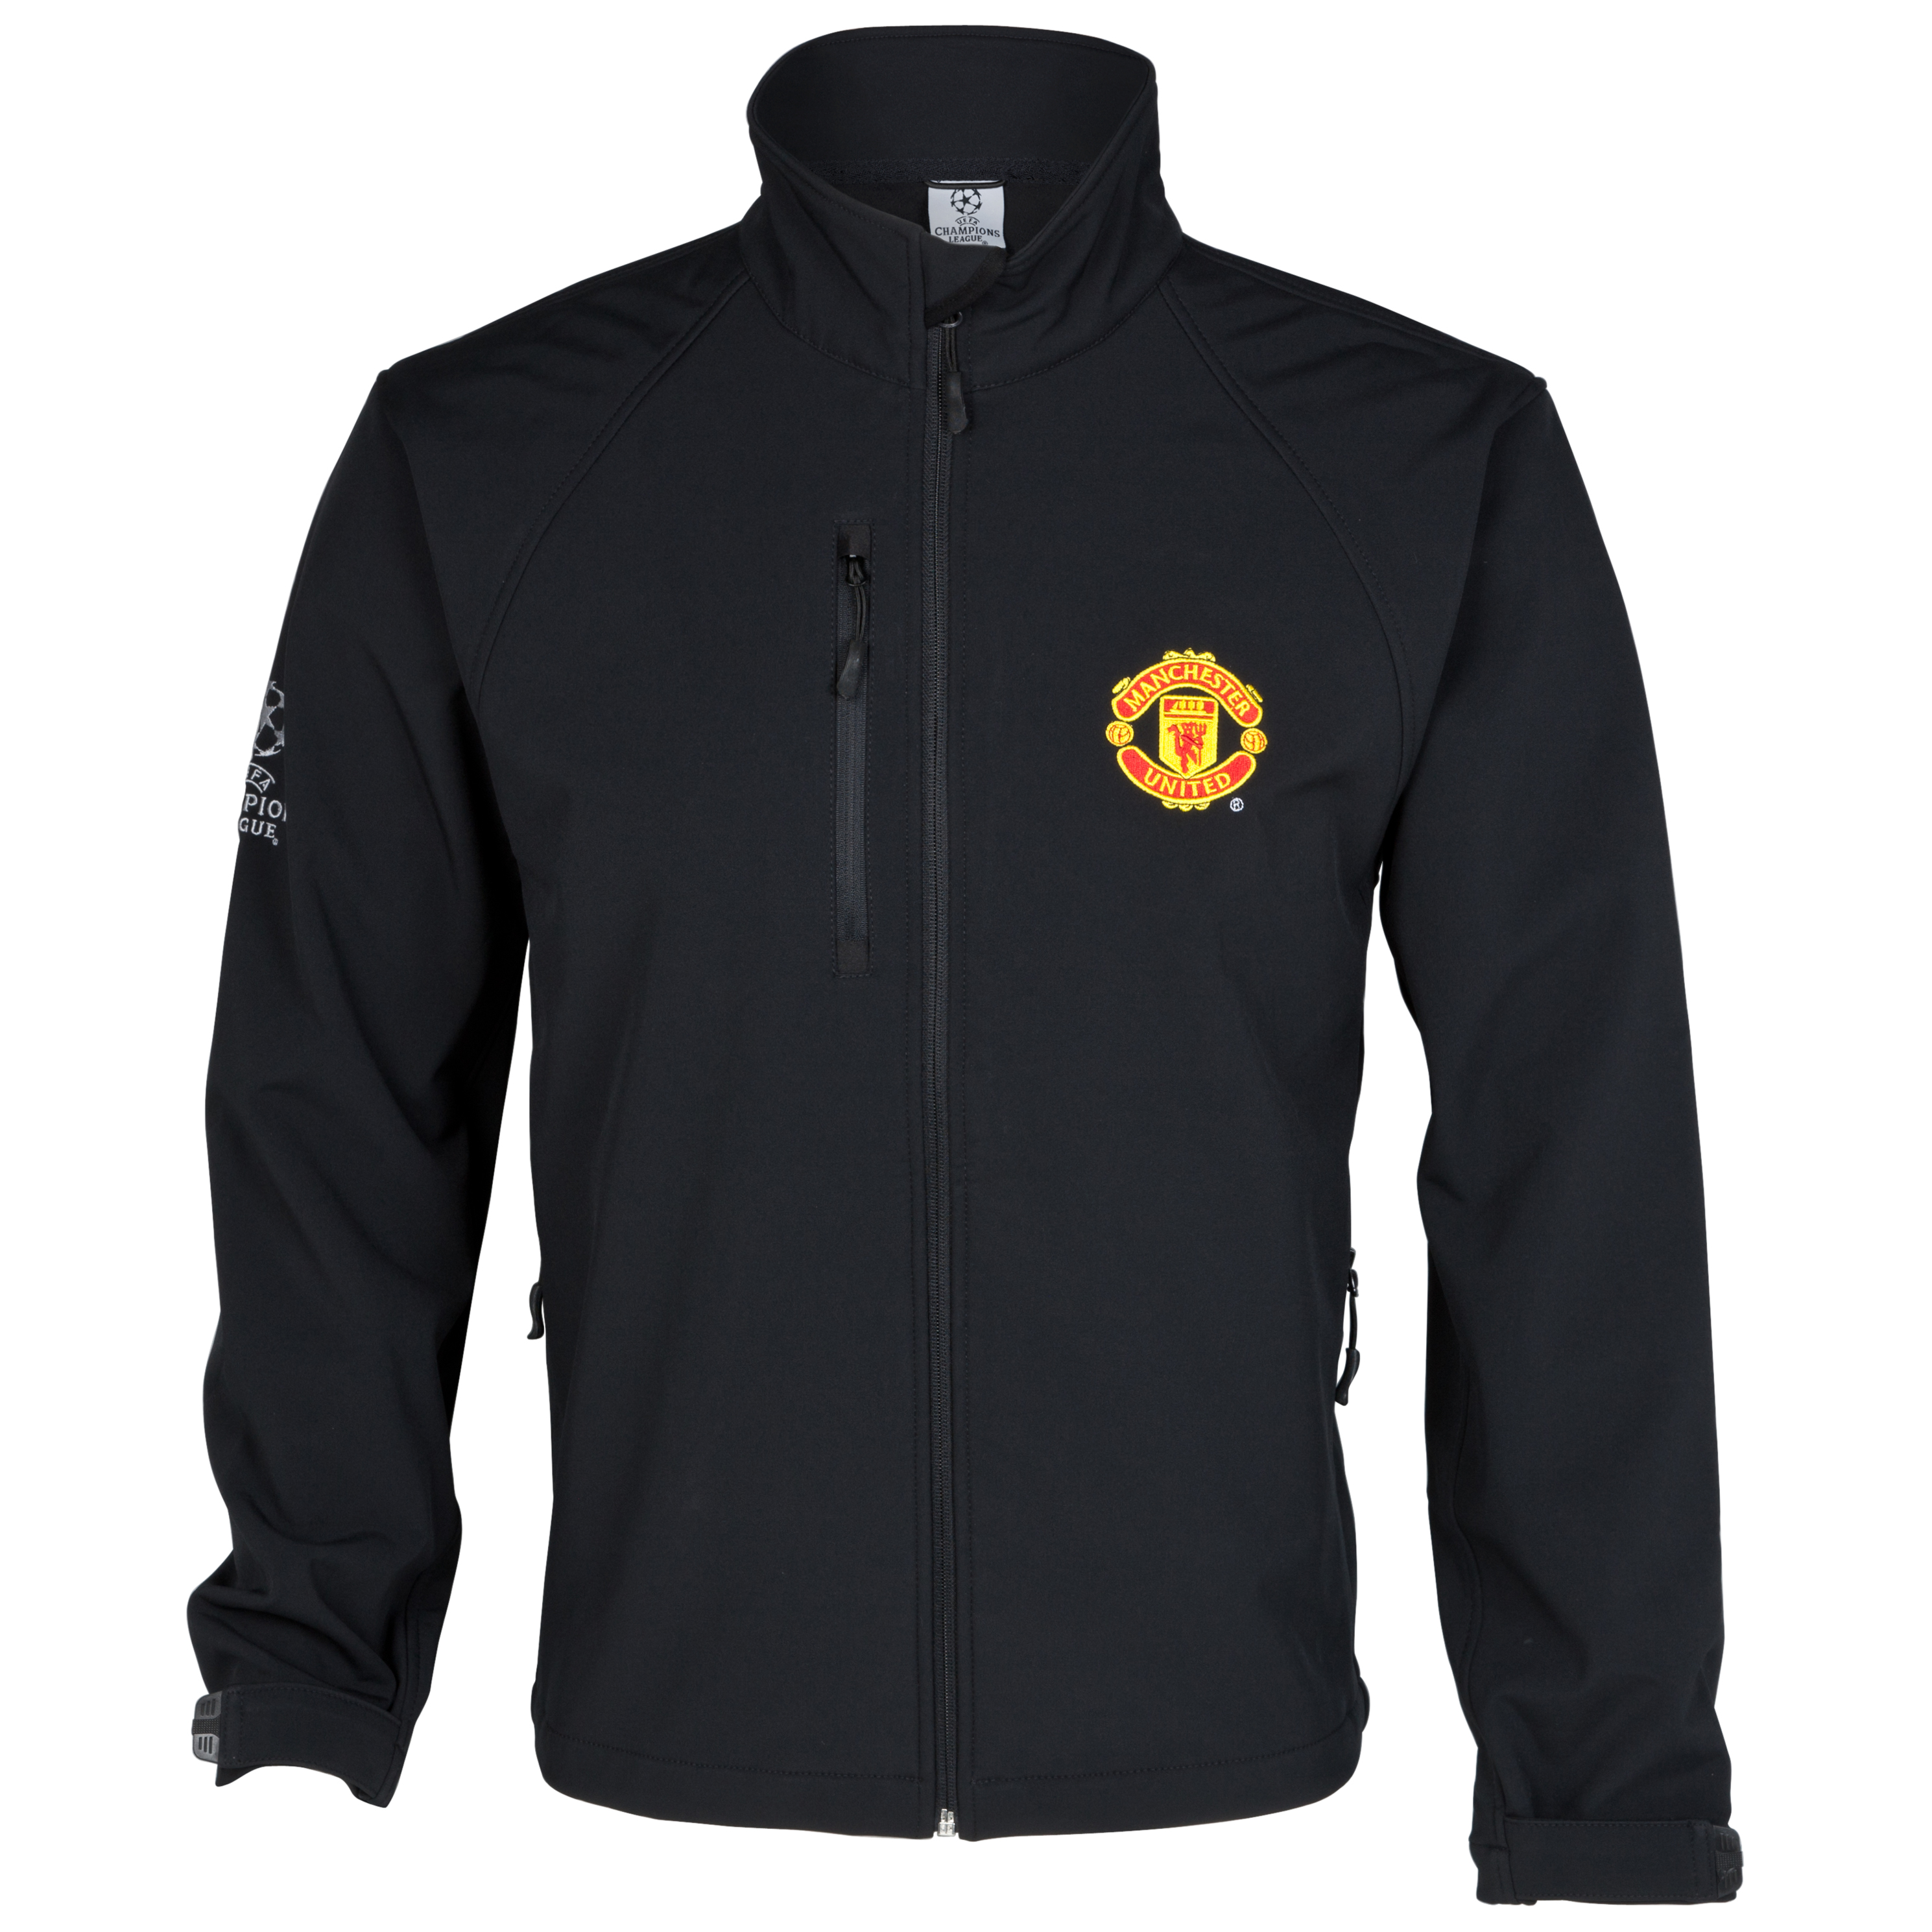 Manchester United UEFA Champions League Embroidered Soft Shell Jacket - Black